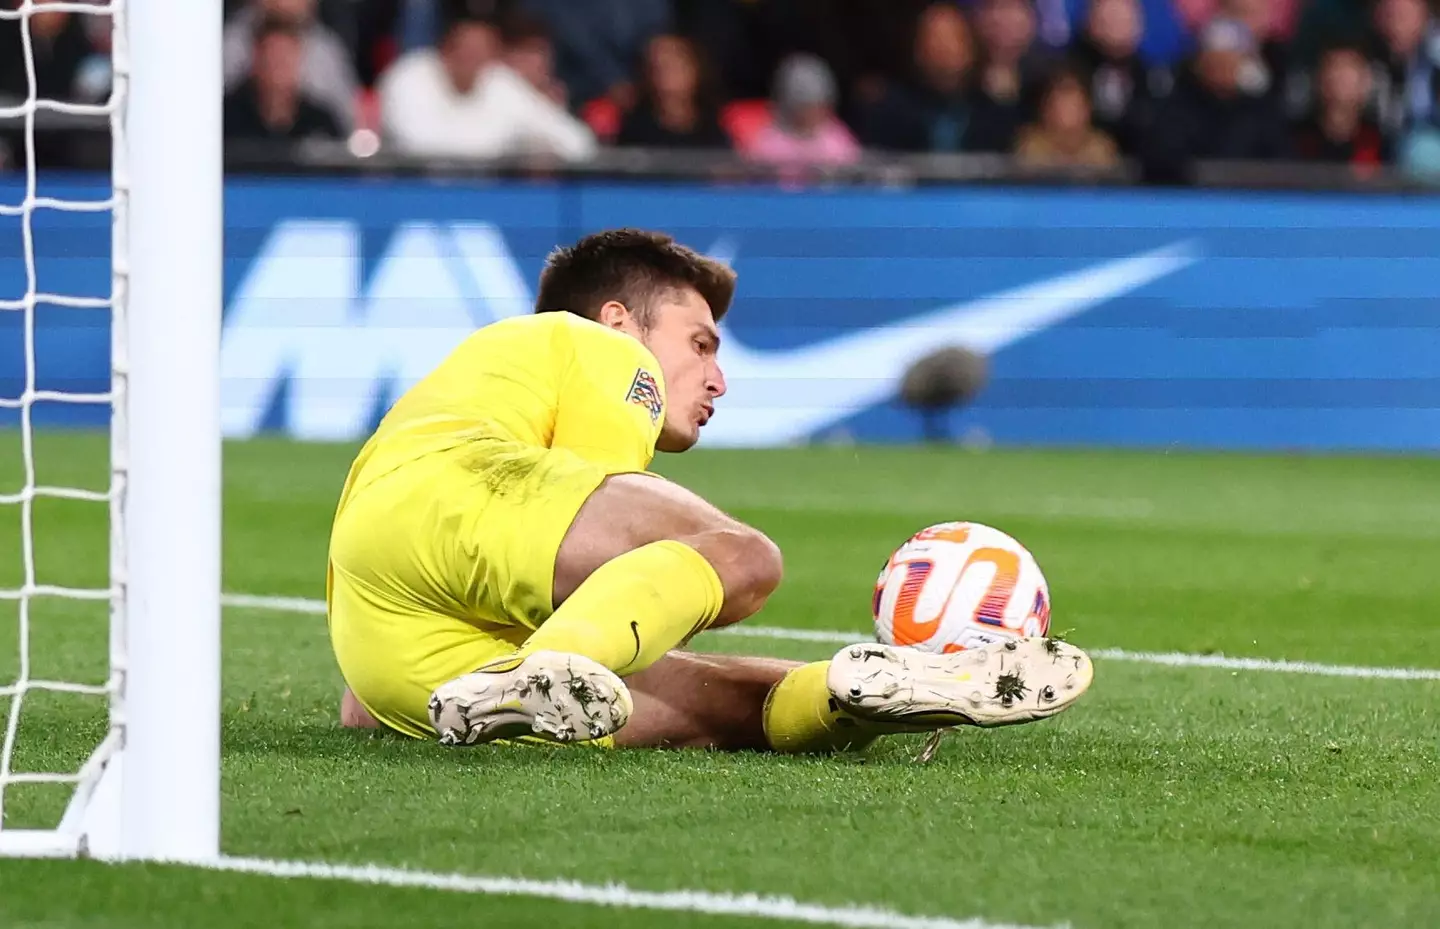 England goalkeeper Nick Pope had a night to forget against Germany (Image: Alamy)